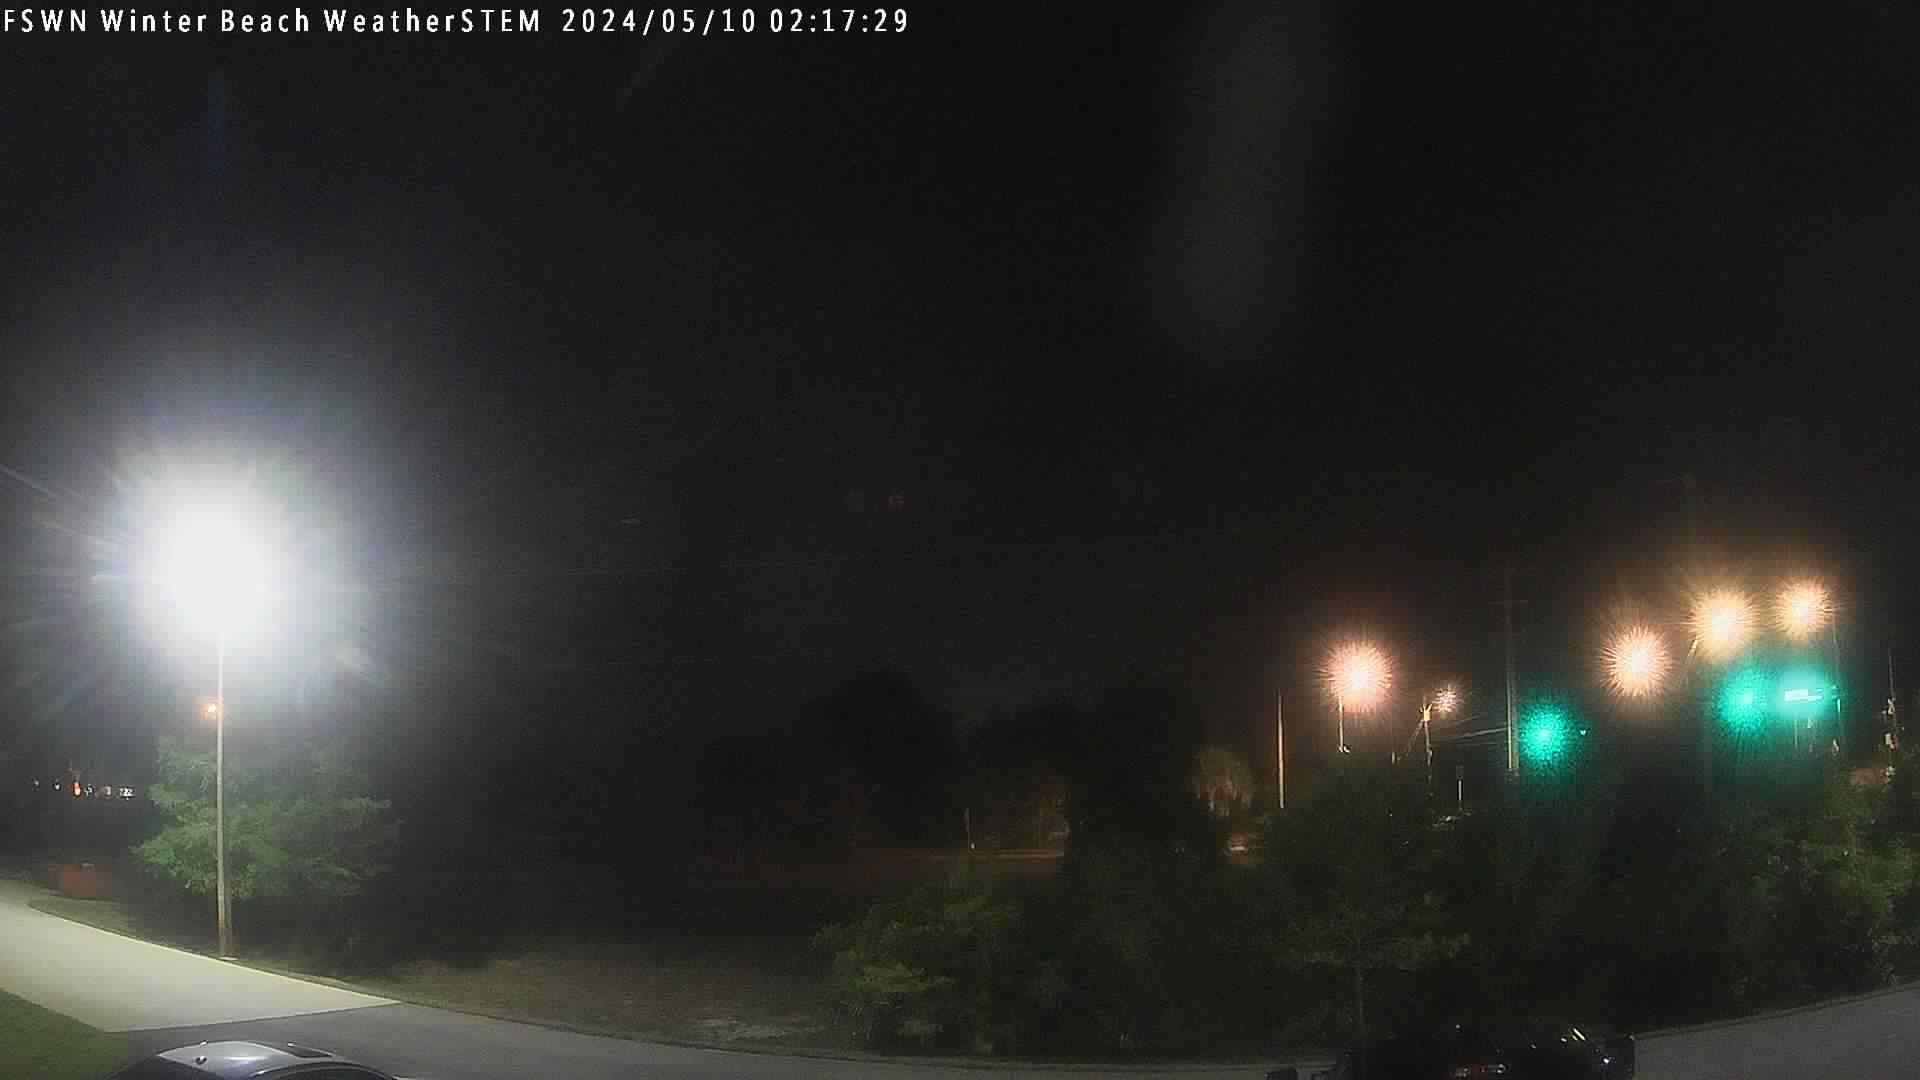  WeatherSTEM Fire Station 5 South Camera FSWNIndianRiver in Indian River County, Florida FL at 